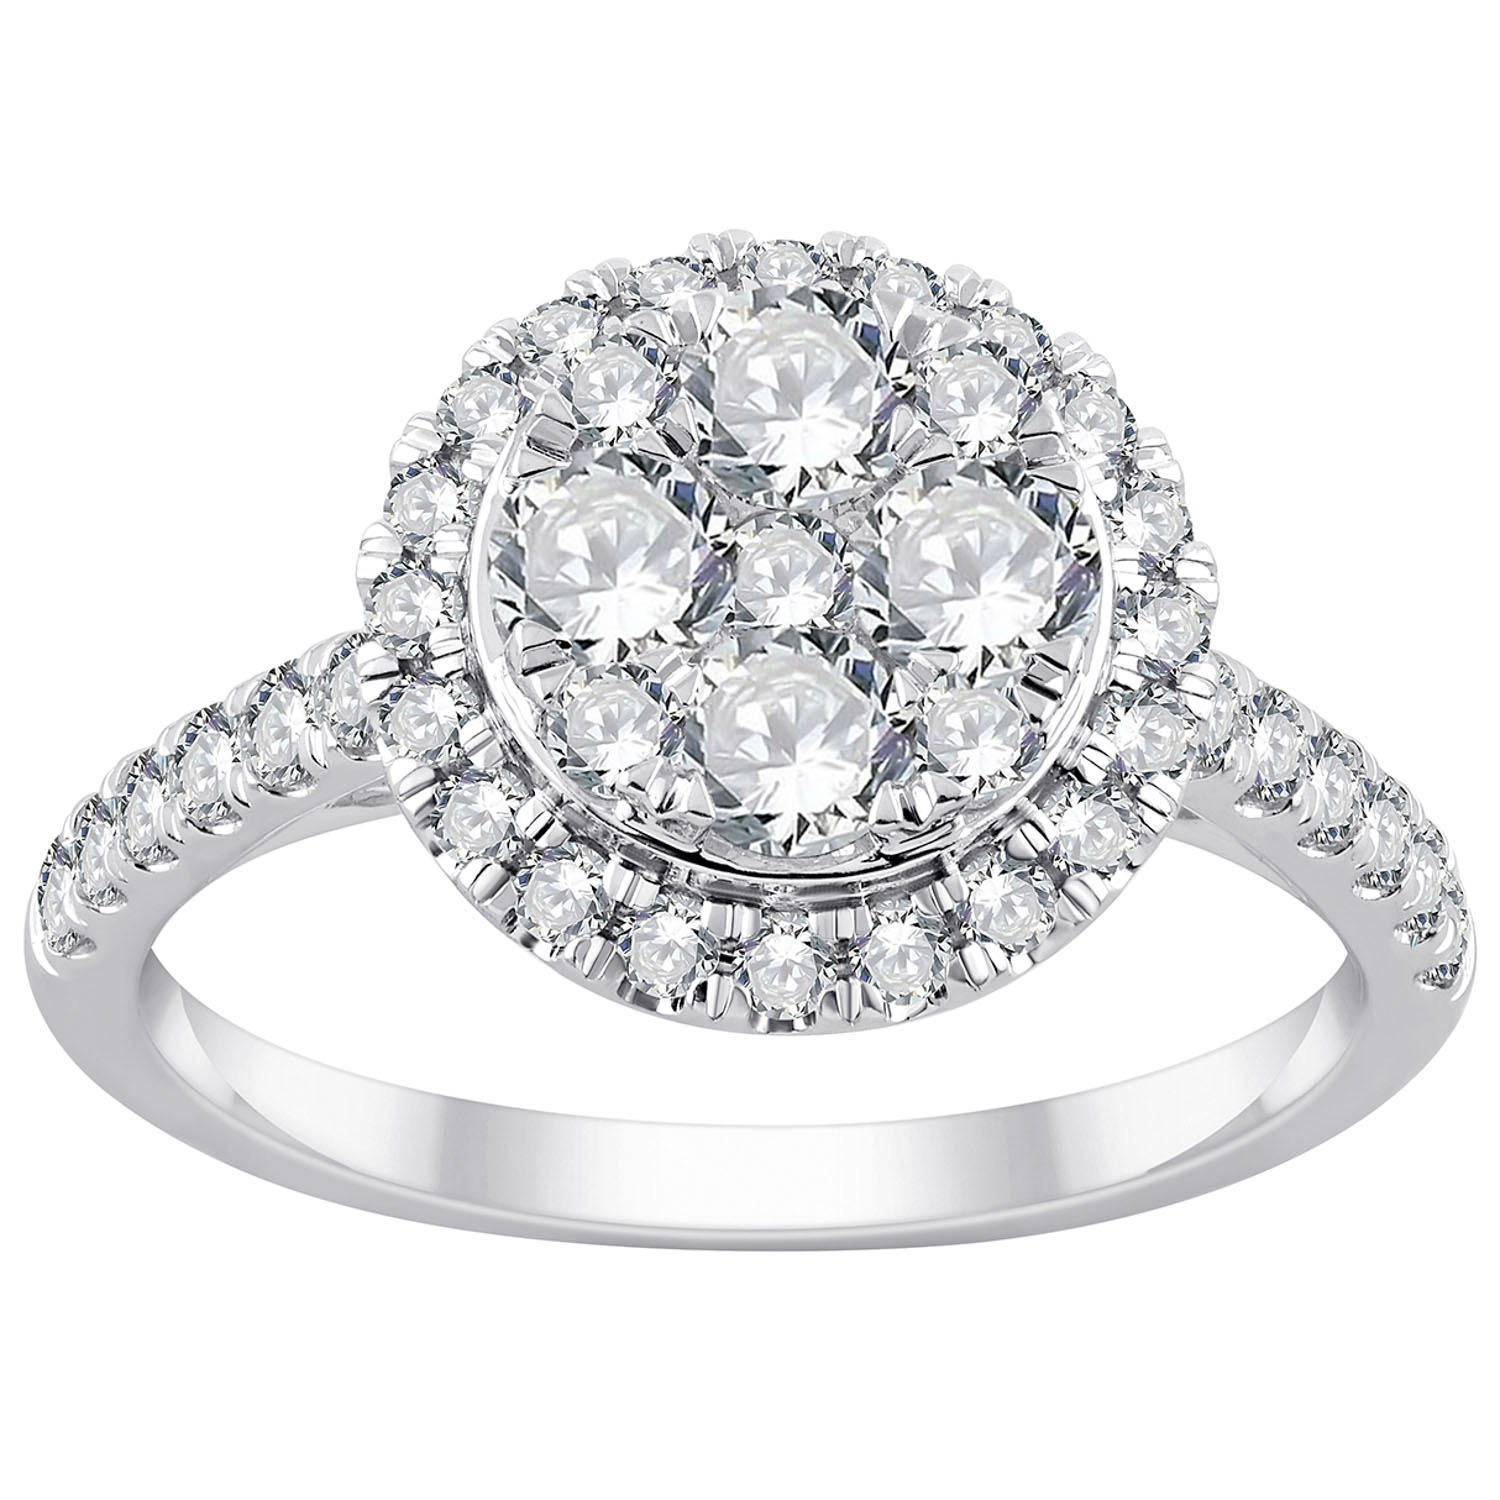 1.20 CT. T.W. Round Halo Diamond Engagement Ring in 14k White Gold, 6